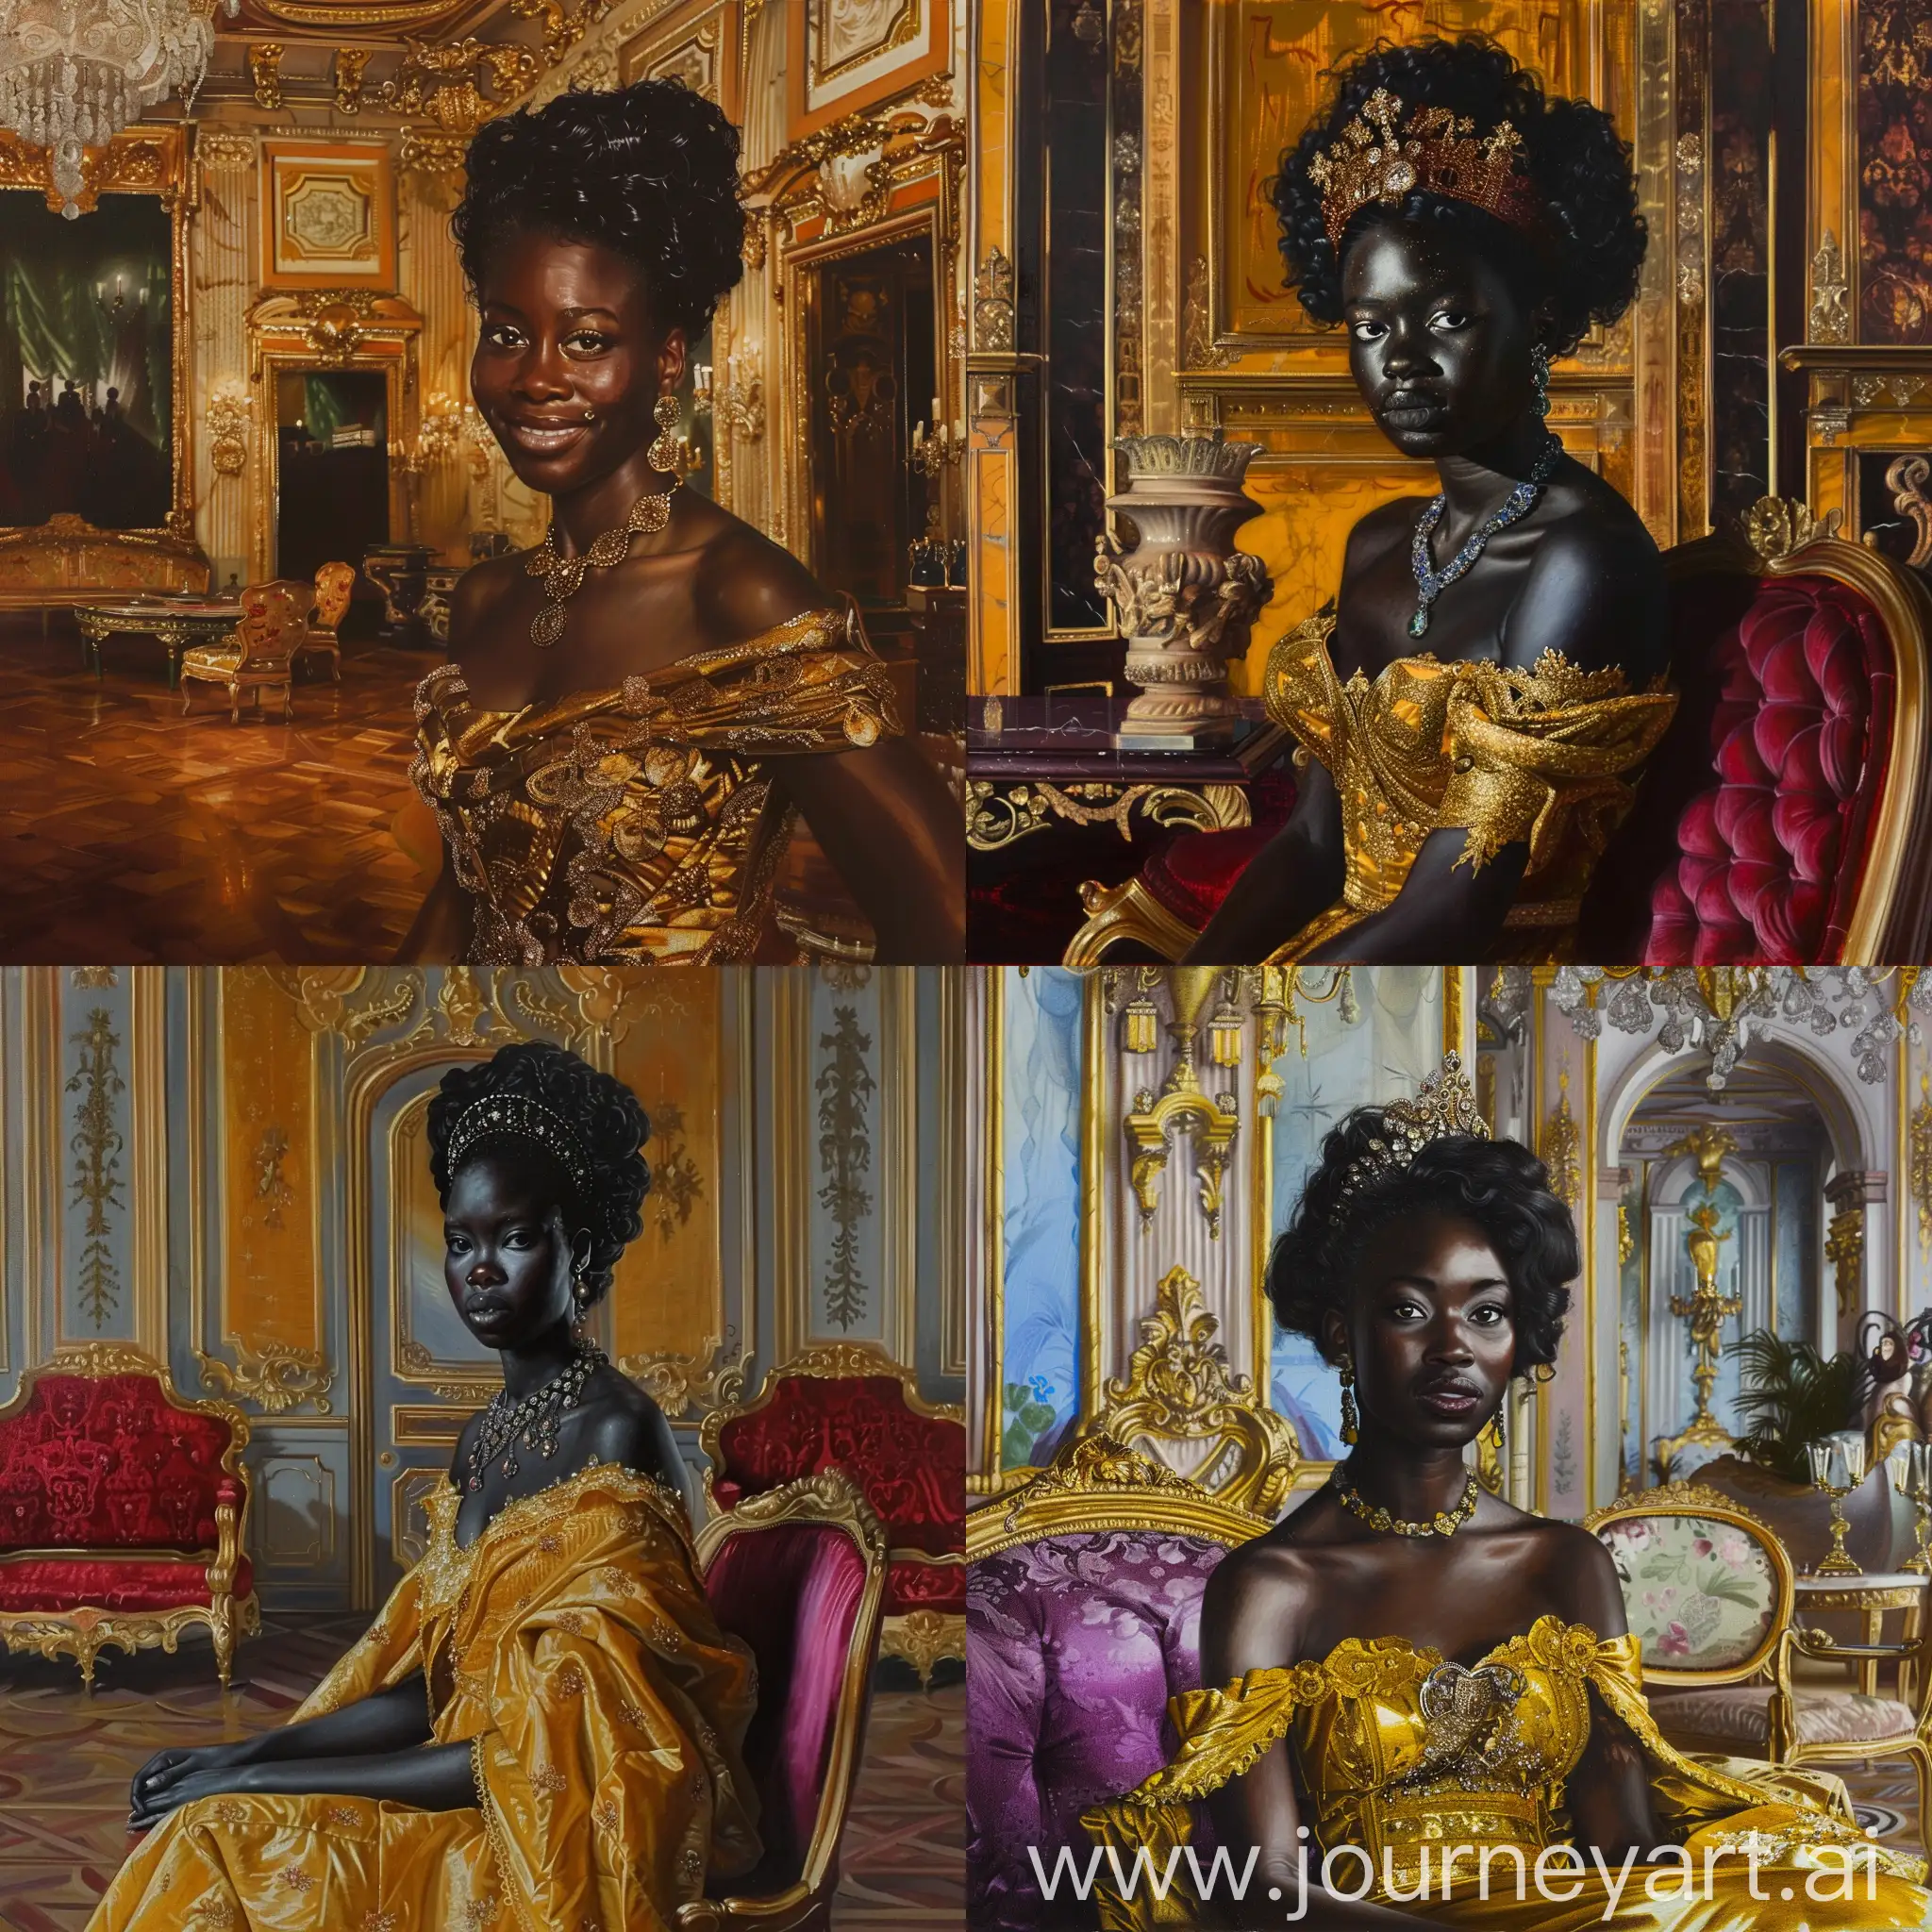 Regal-Portrait-of-an-African-Duchess-in-a-Luxurious-Palace